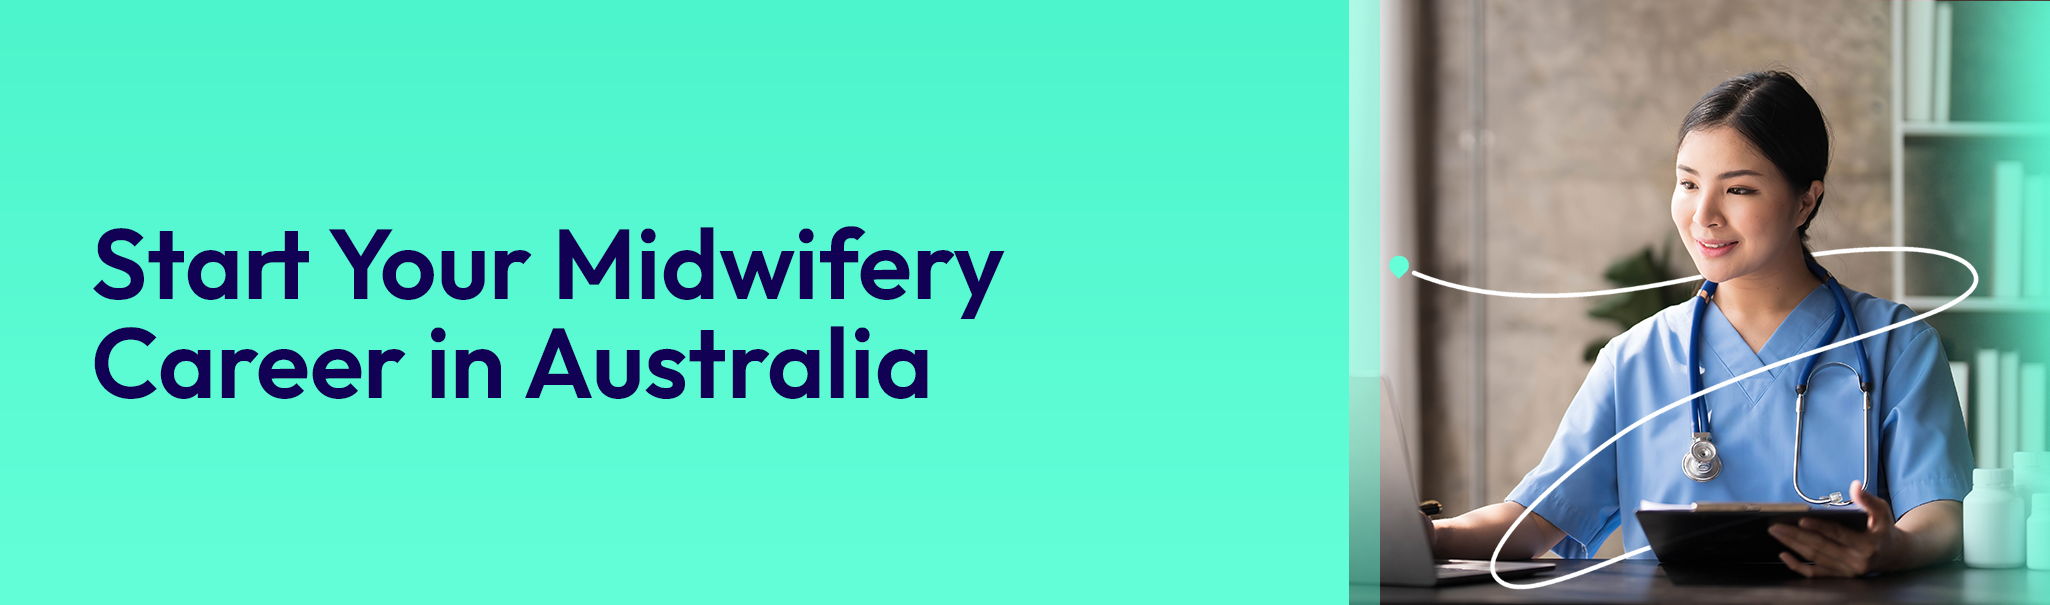 midwife How to Become A Midwife In Australia | Salaries